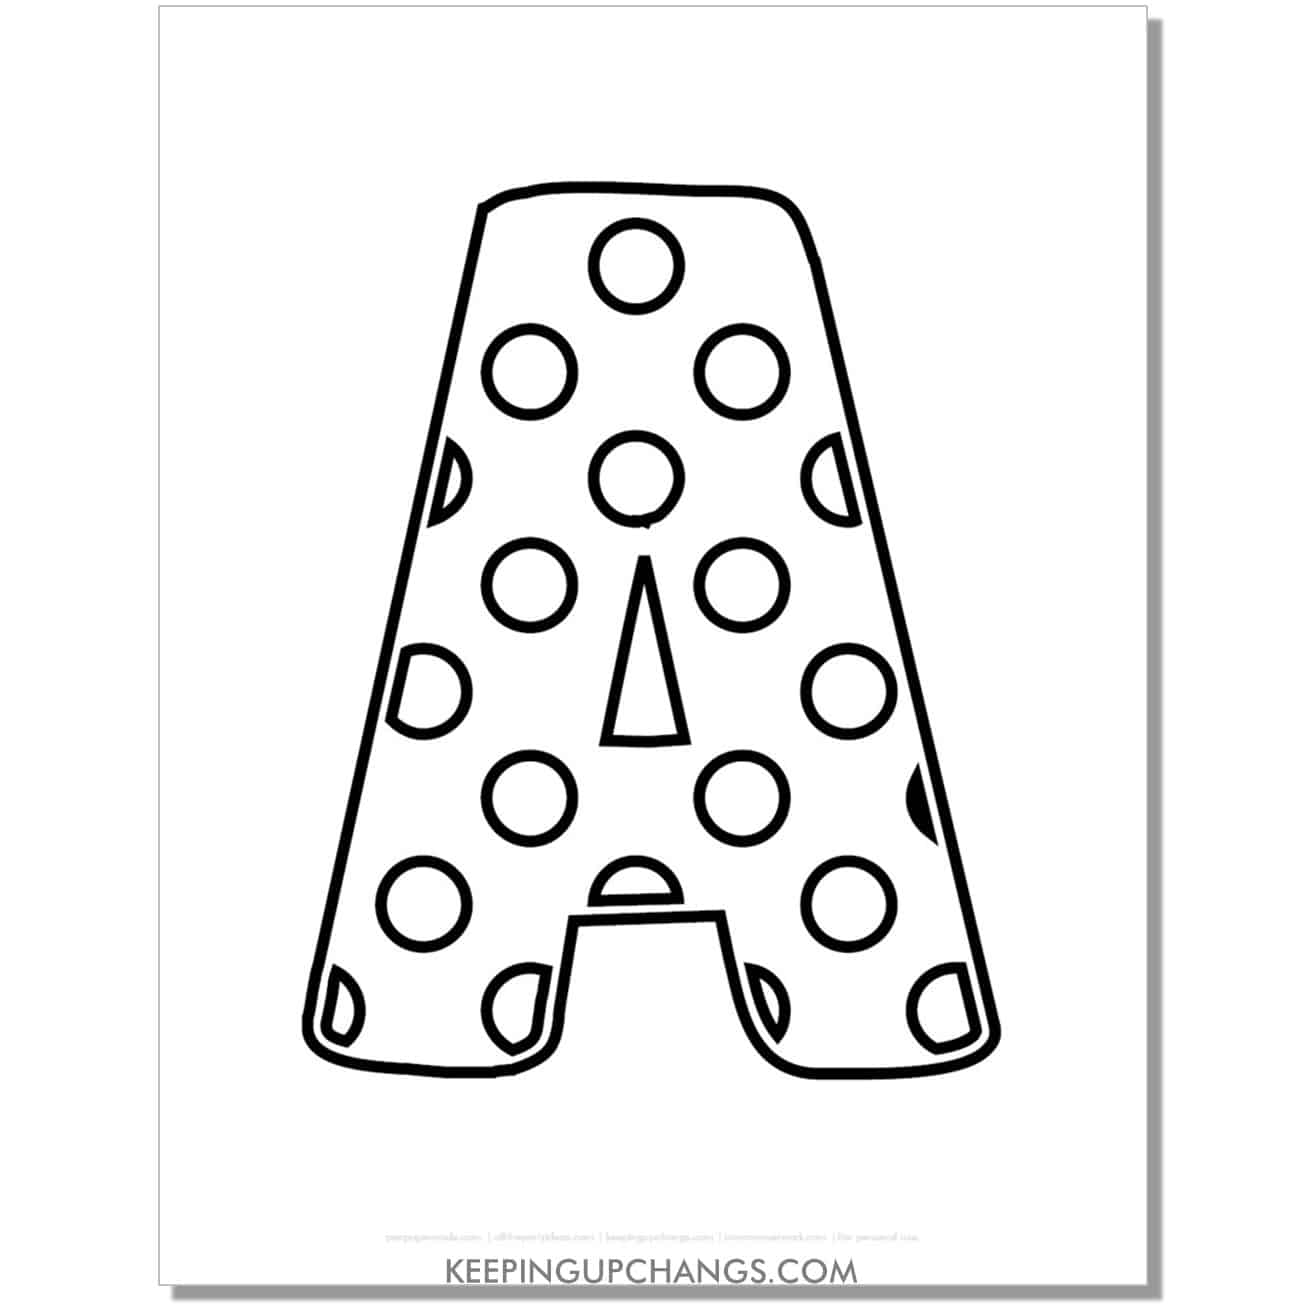 free alphabet letter a coloring page with polka dots for toddlers, preschool, kindergarten.